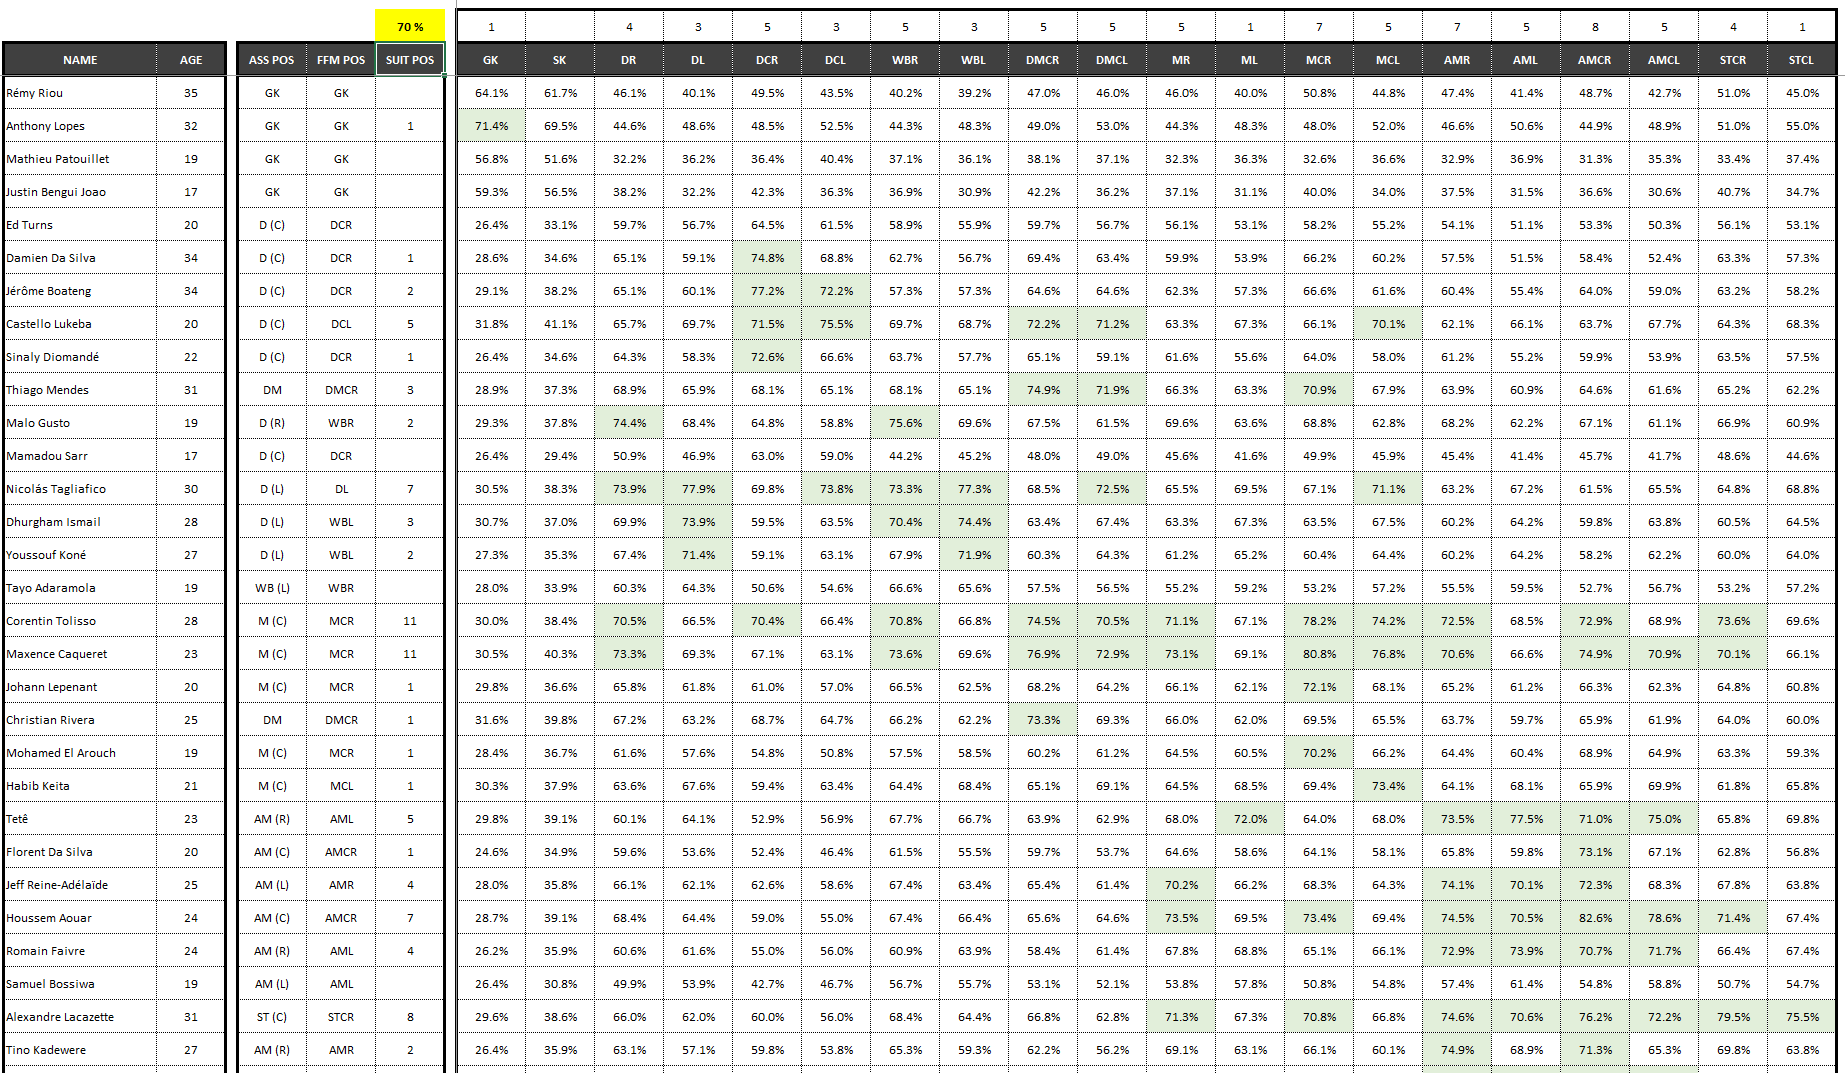 Overall positions - FFM Attribute Analysis spreadsheet